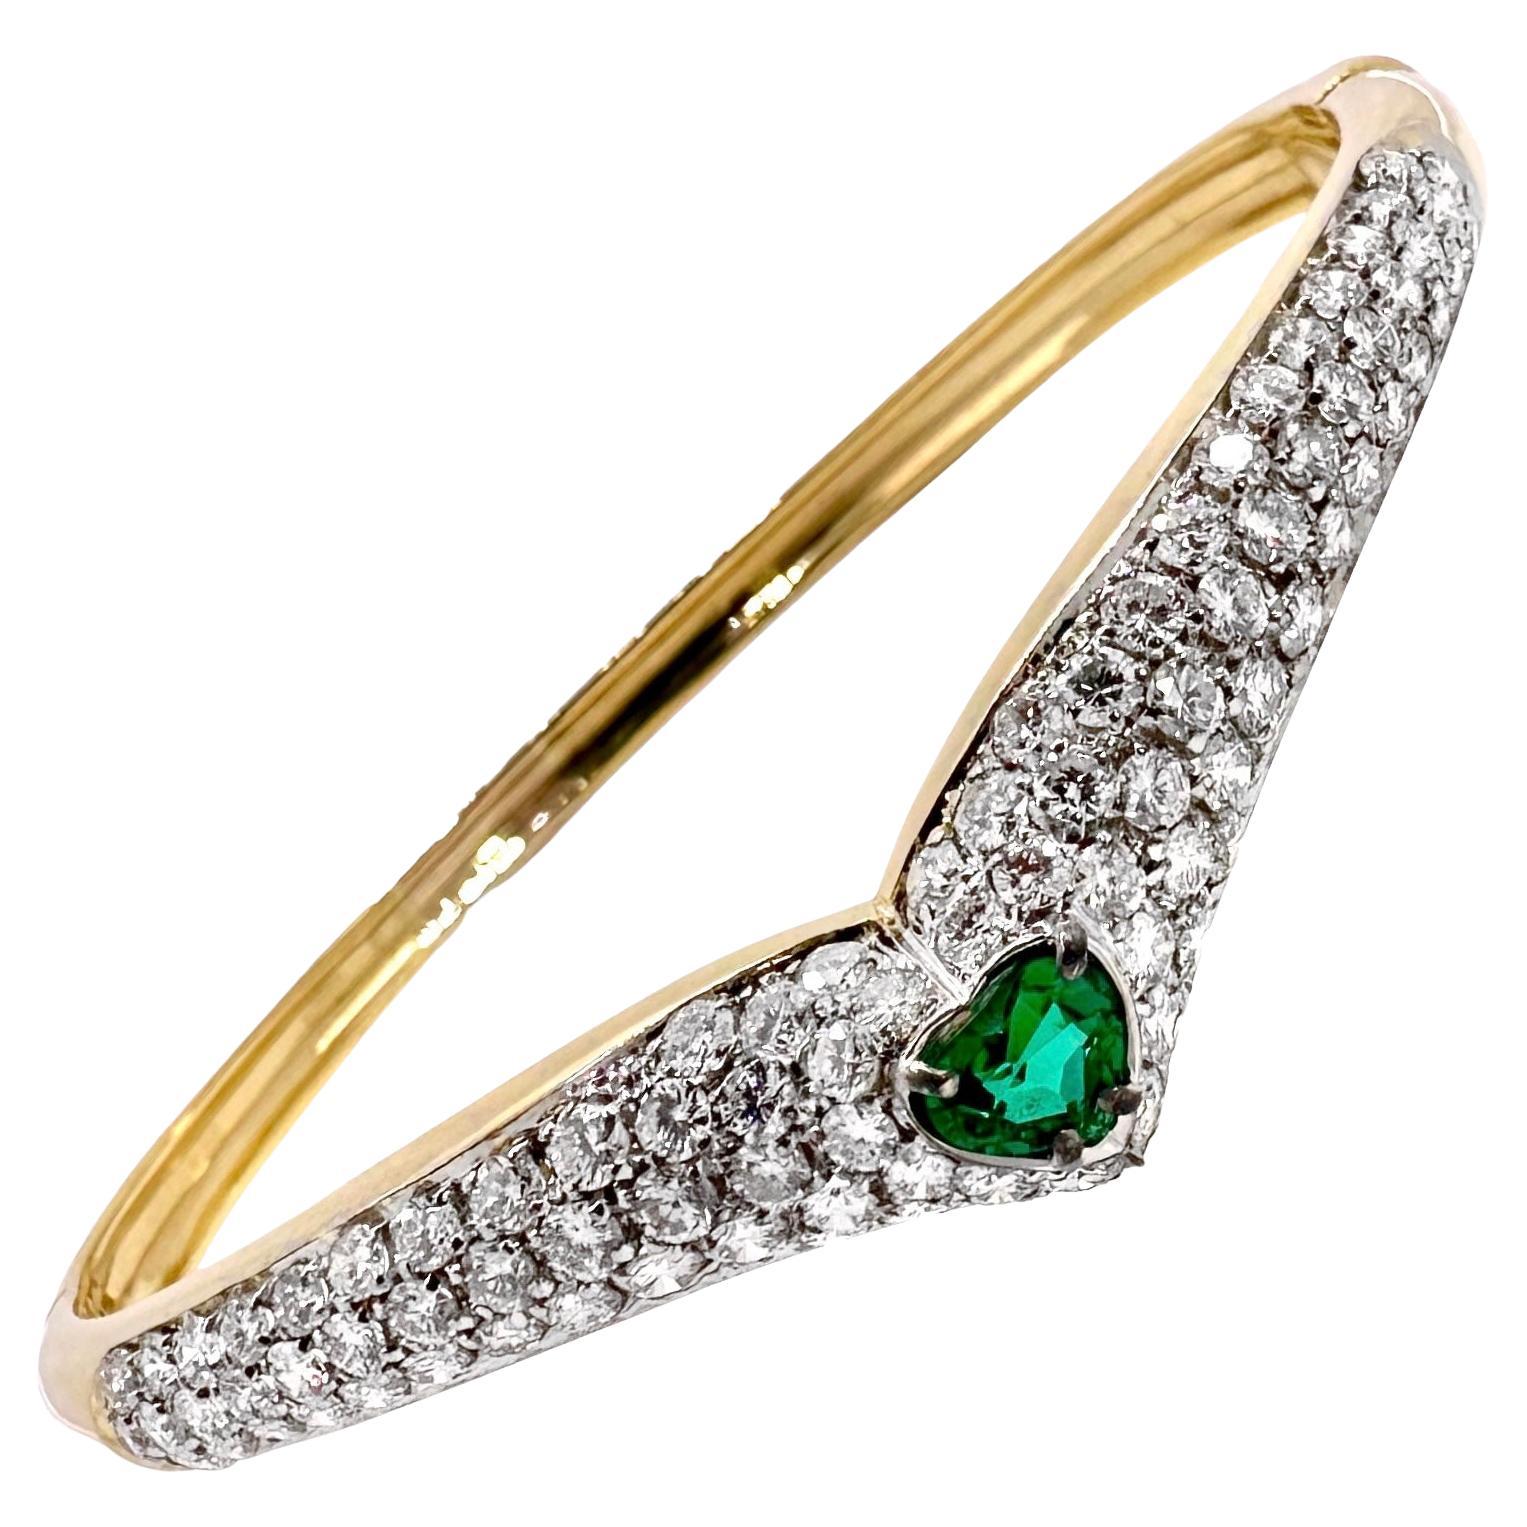 This stylish and dazzling 18k yellow gold hinged bangle bracelet is unmistakably a product of the 1970' or 1980's. Set at the center of a bombe chevron form plate, is an absolutely vivid heart shape natural emerald. Framing this small gem are long